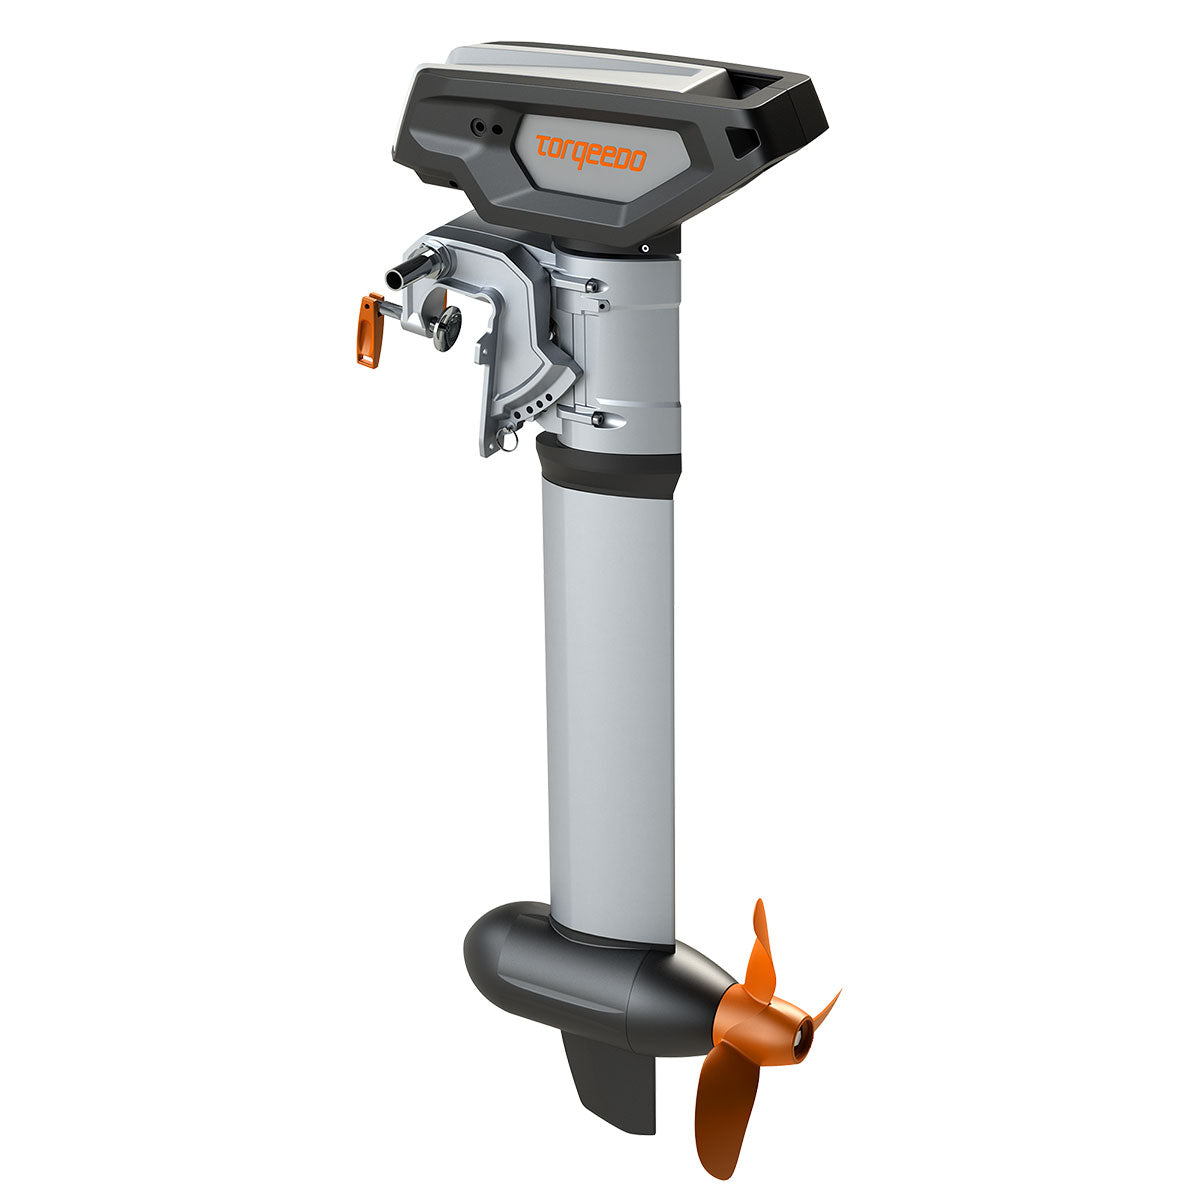 Torqeedo Cruise 6.0 R TorqLink Electric outboard for motorboats and sailboats up to 6 tons